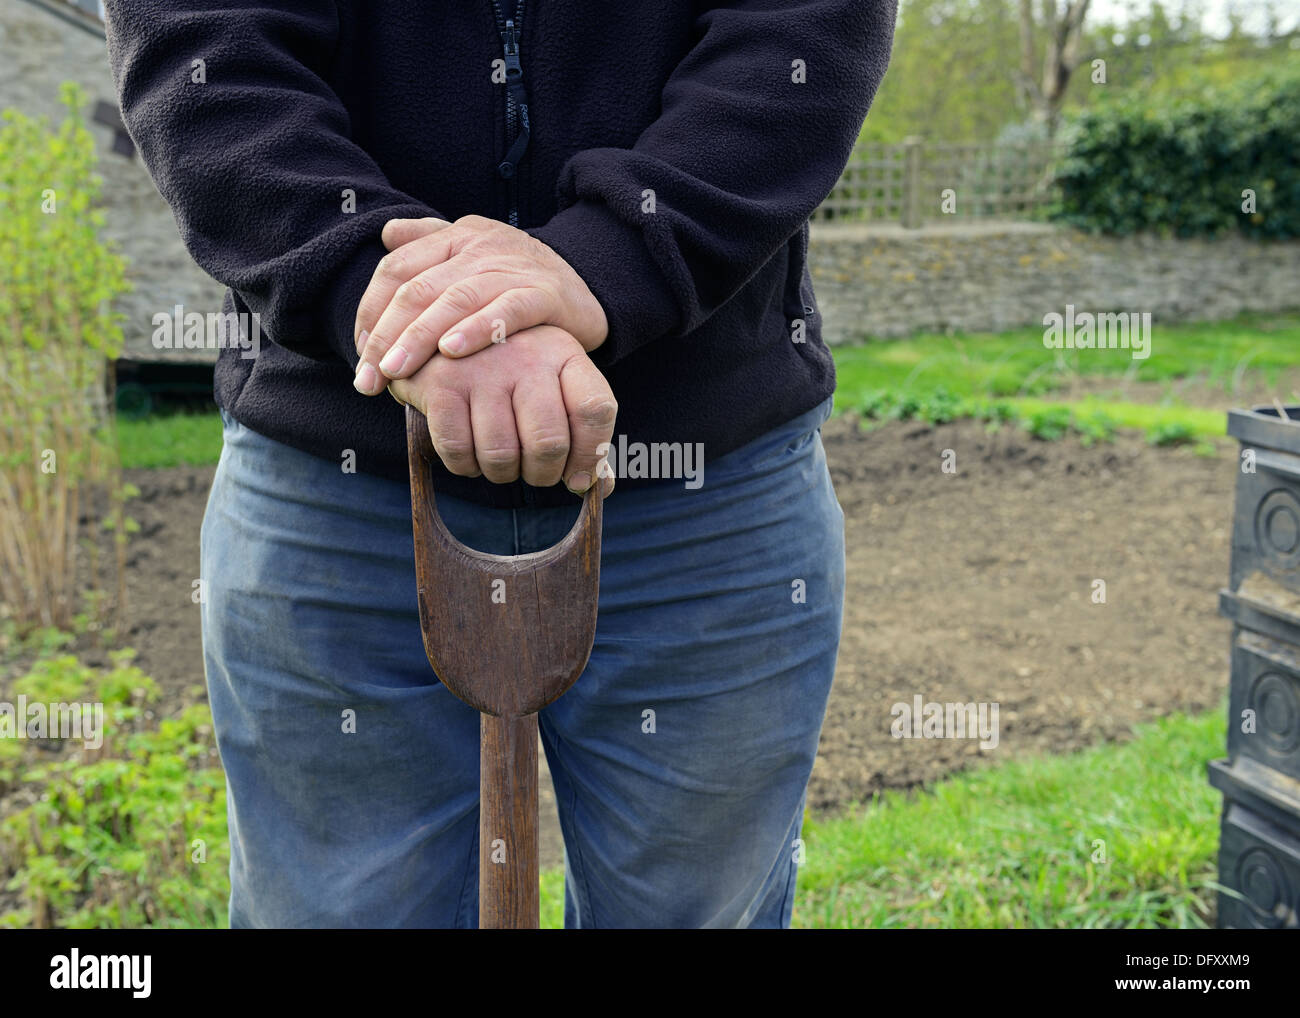 Man on an Allotment Prepared for Cultivation. Oxfordshire, England, United Kingdom Stock Photo